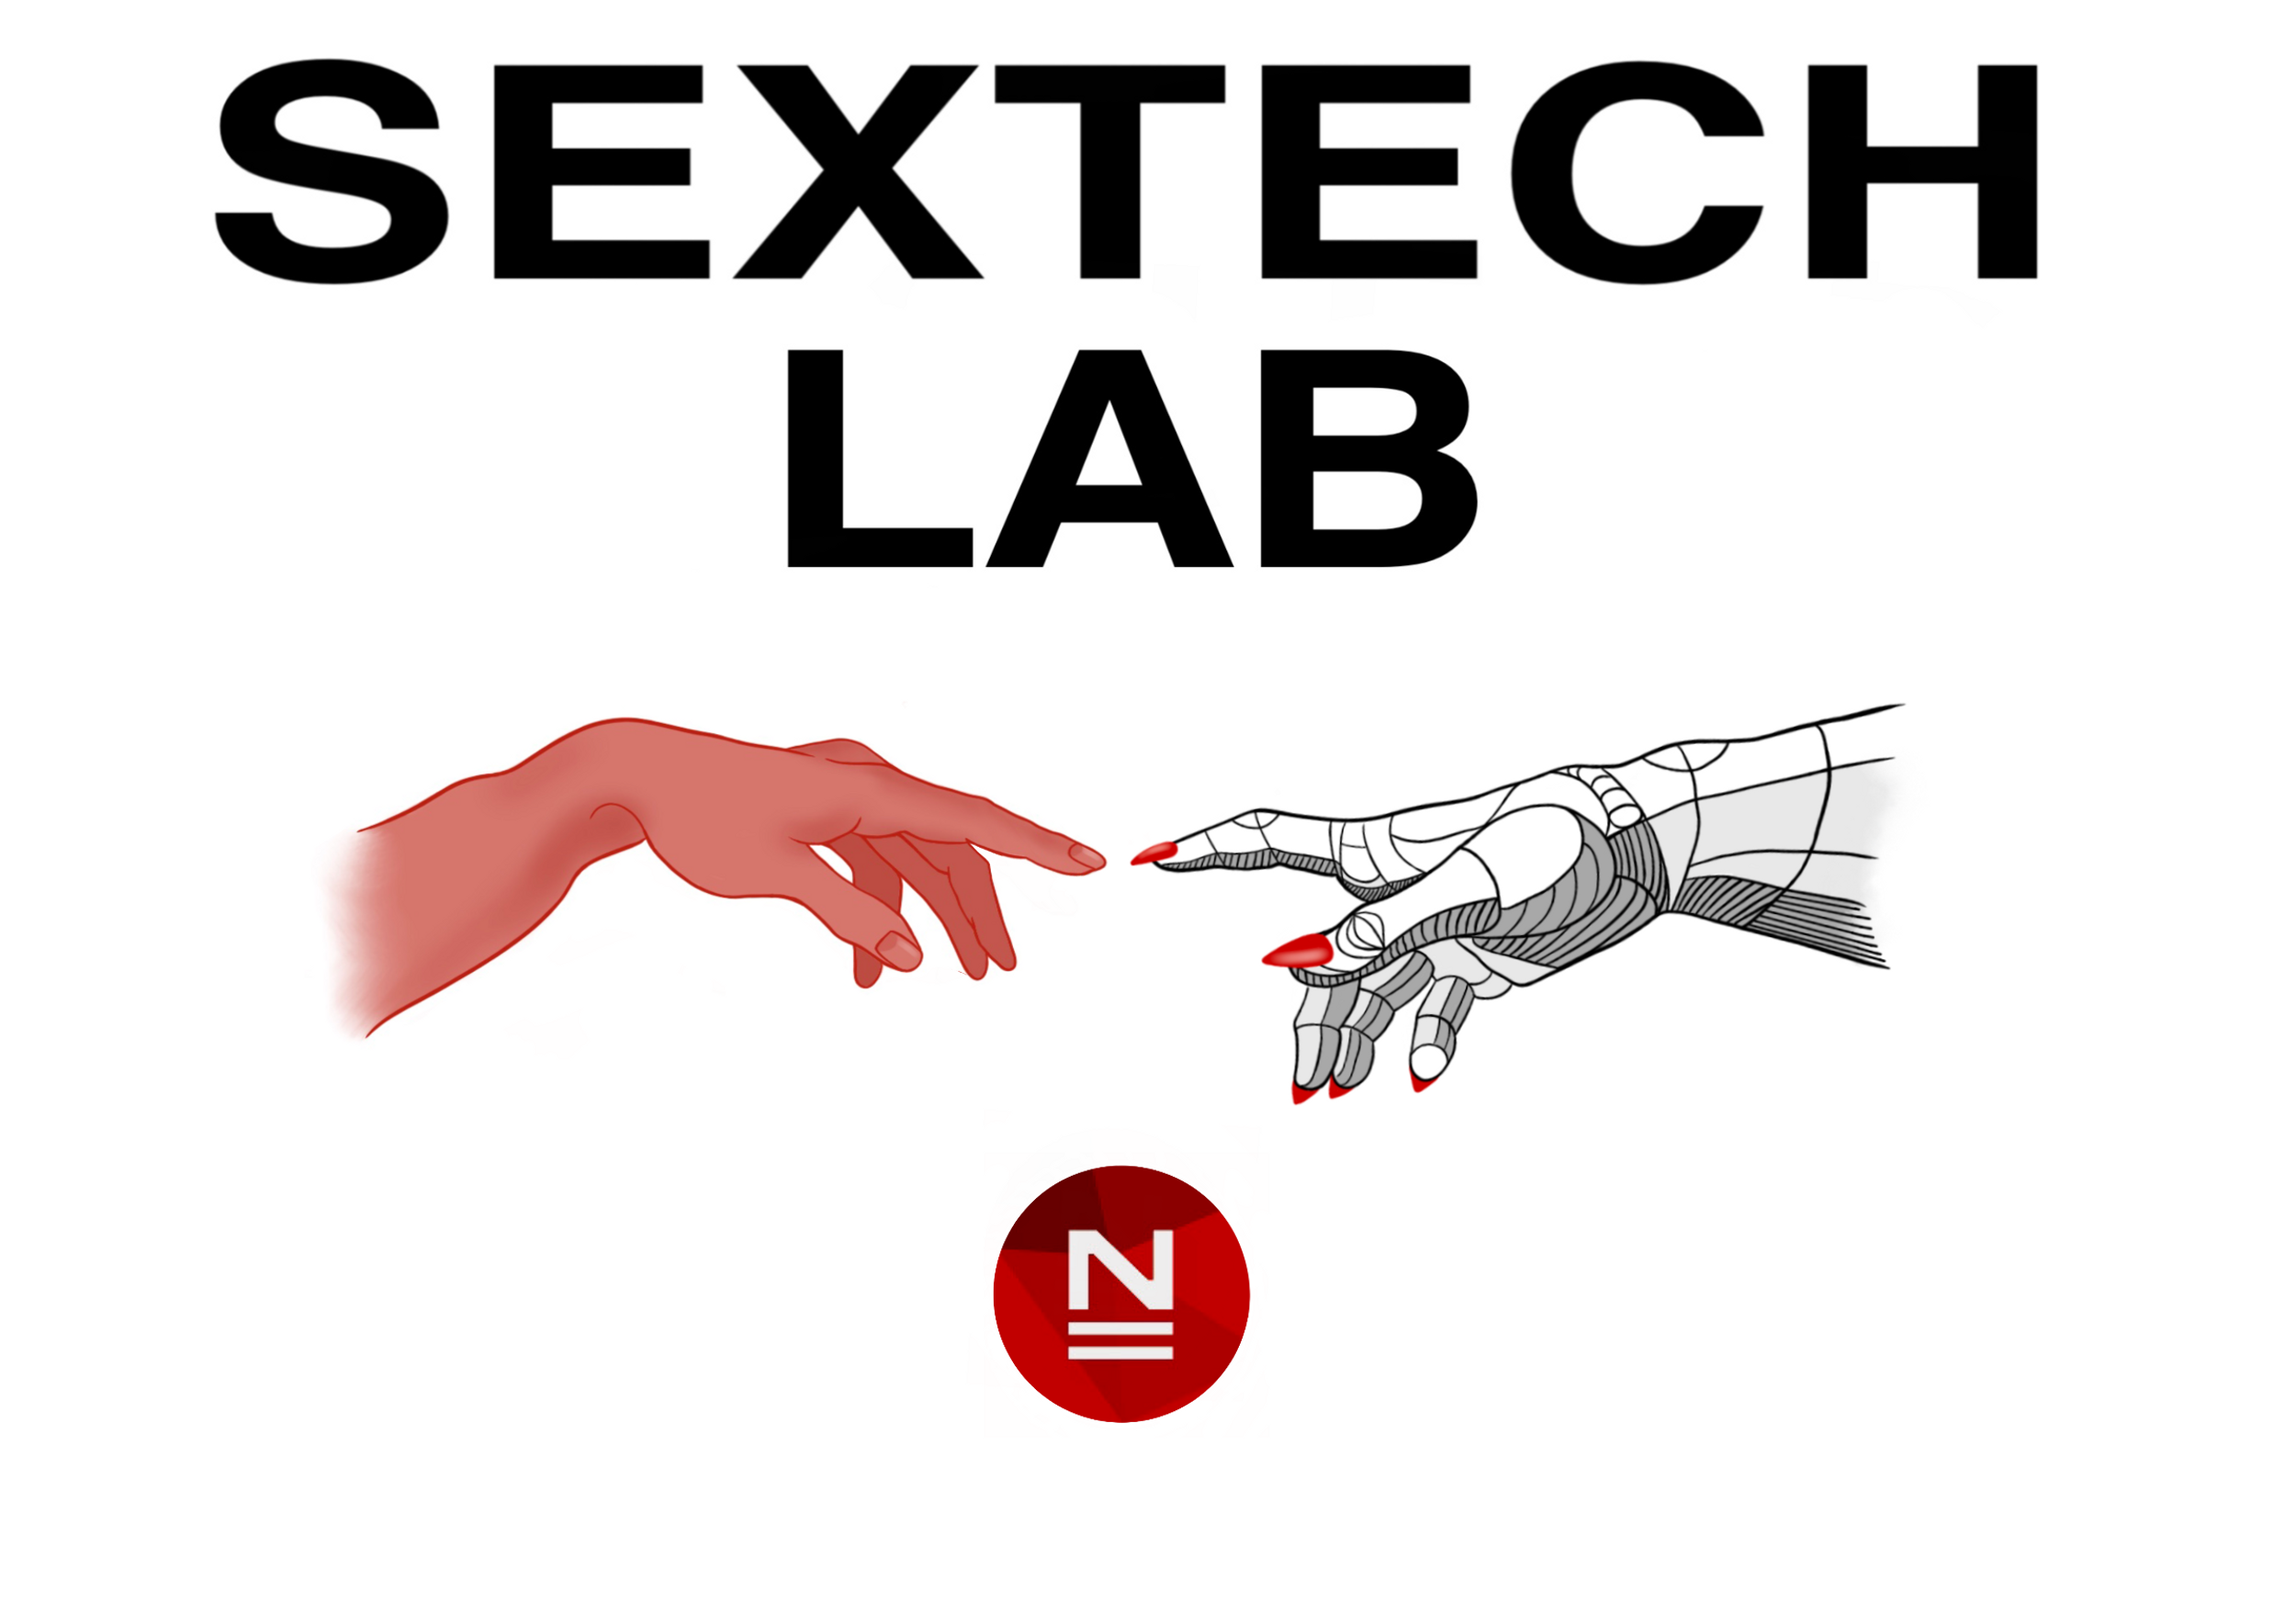 sextech lab logo. A research program by The New School